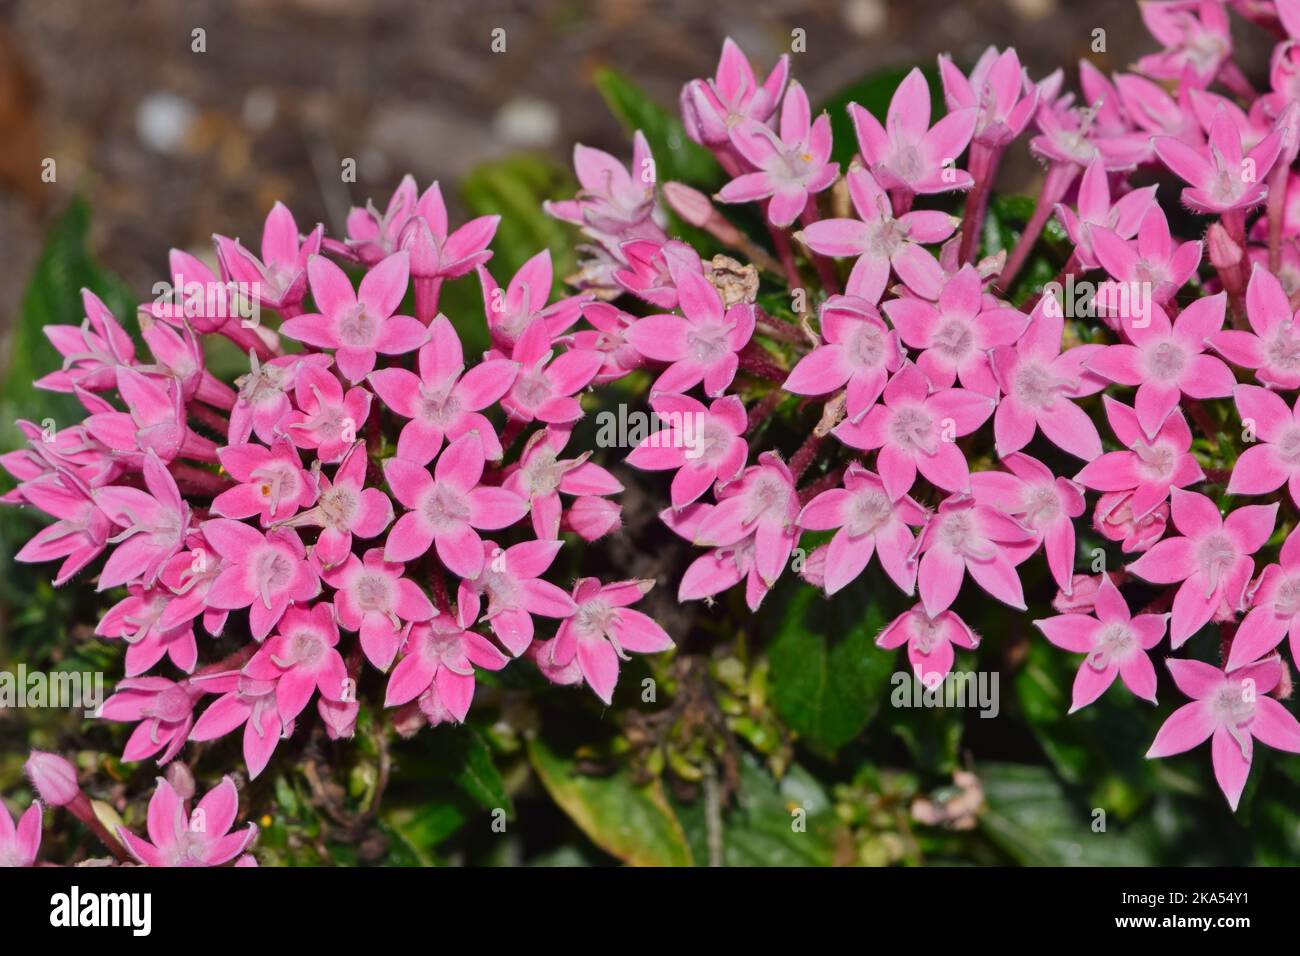 Pink Egyptian starcluster (Pentas lanceolata) flowers blooming in a garden bed. African flowering plant in the Madder family Rubiaceae. Stock Photo